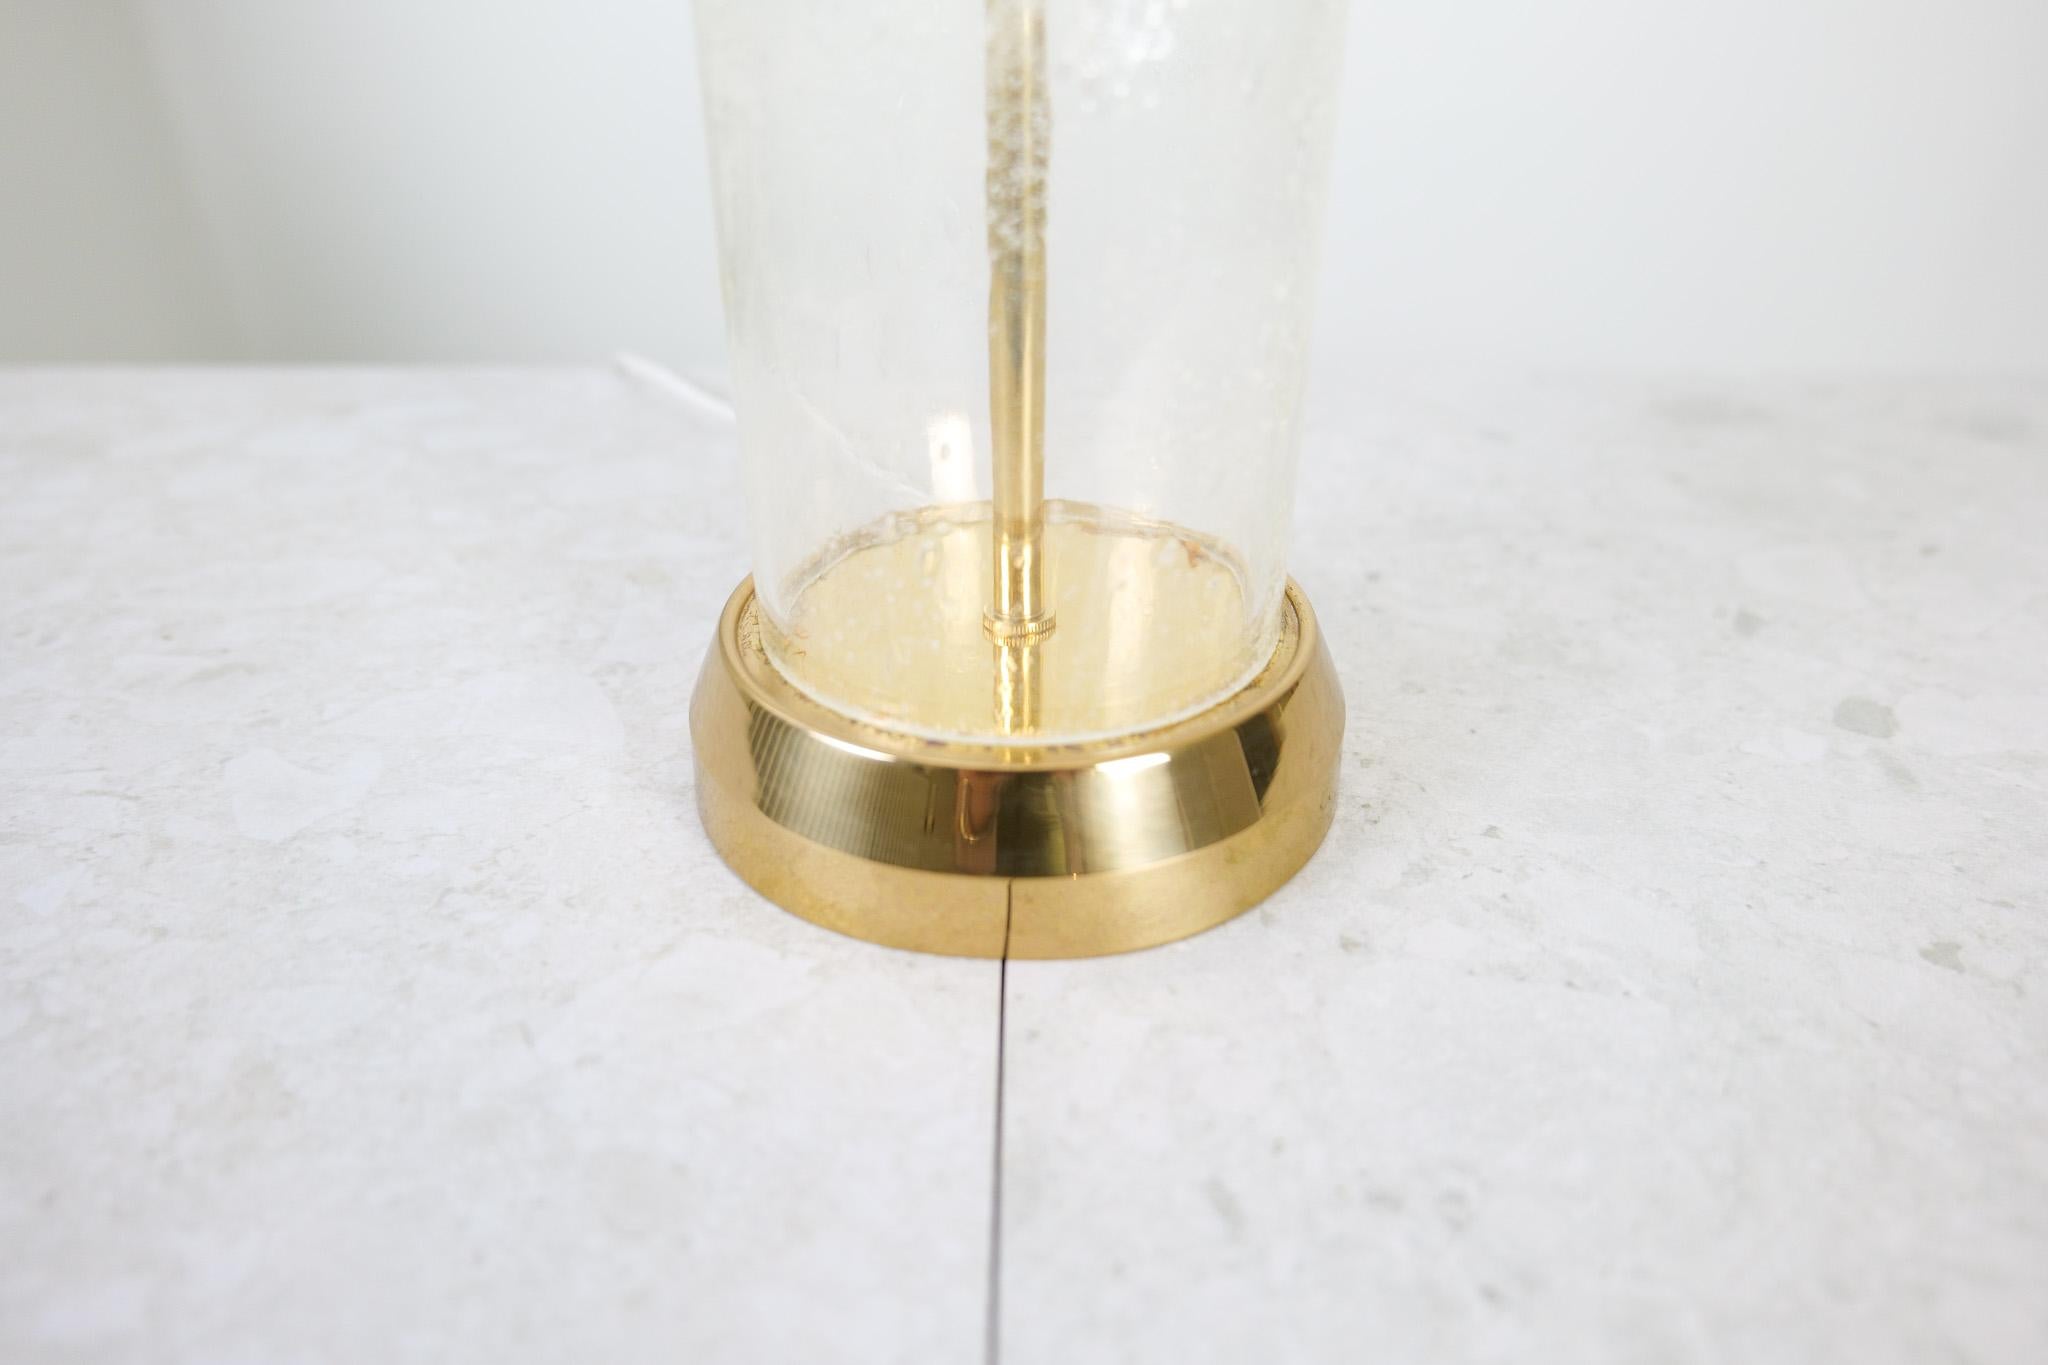 Mid-20th Century Midcentury Modern Glass and Brass Table Lamp Bergbom B-019 Sweden 1960s For Sale